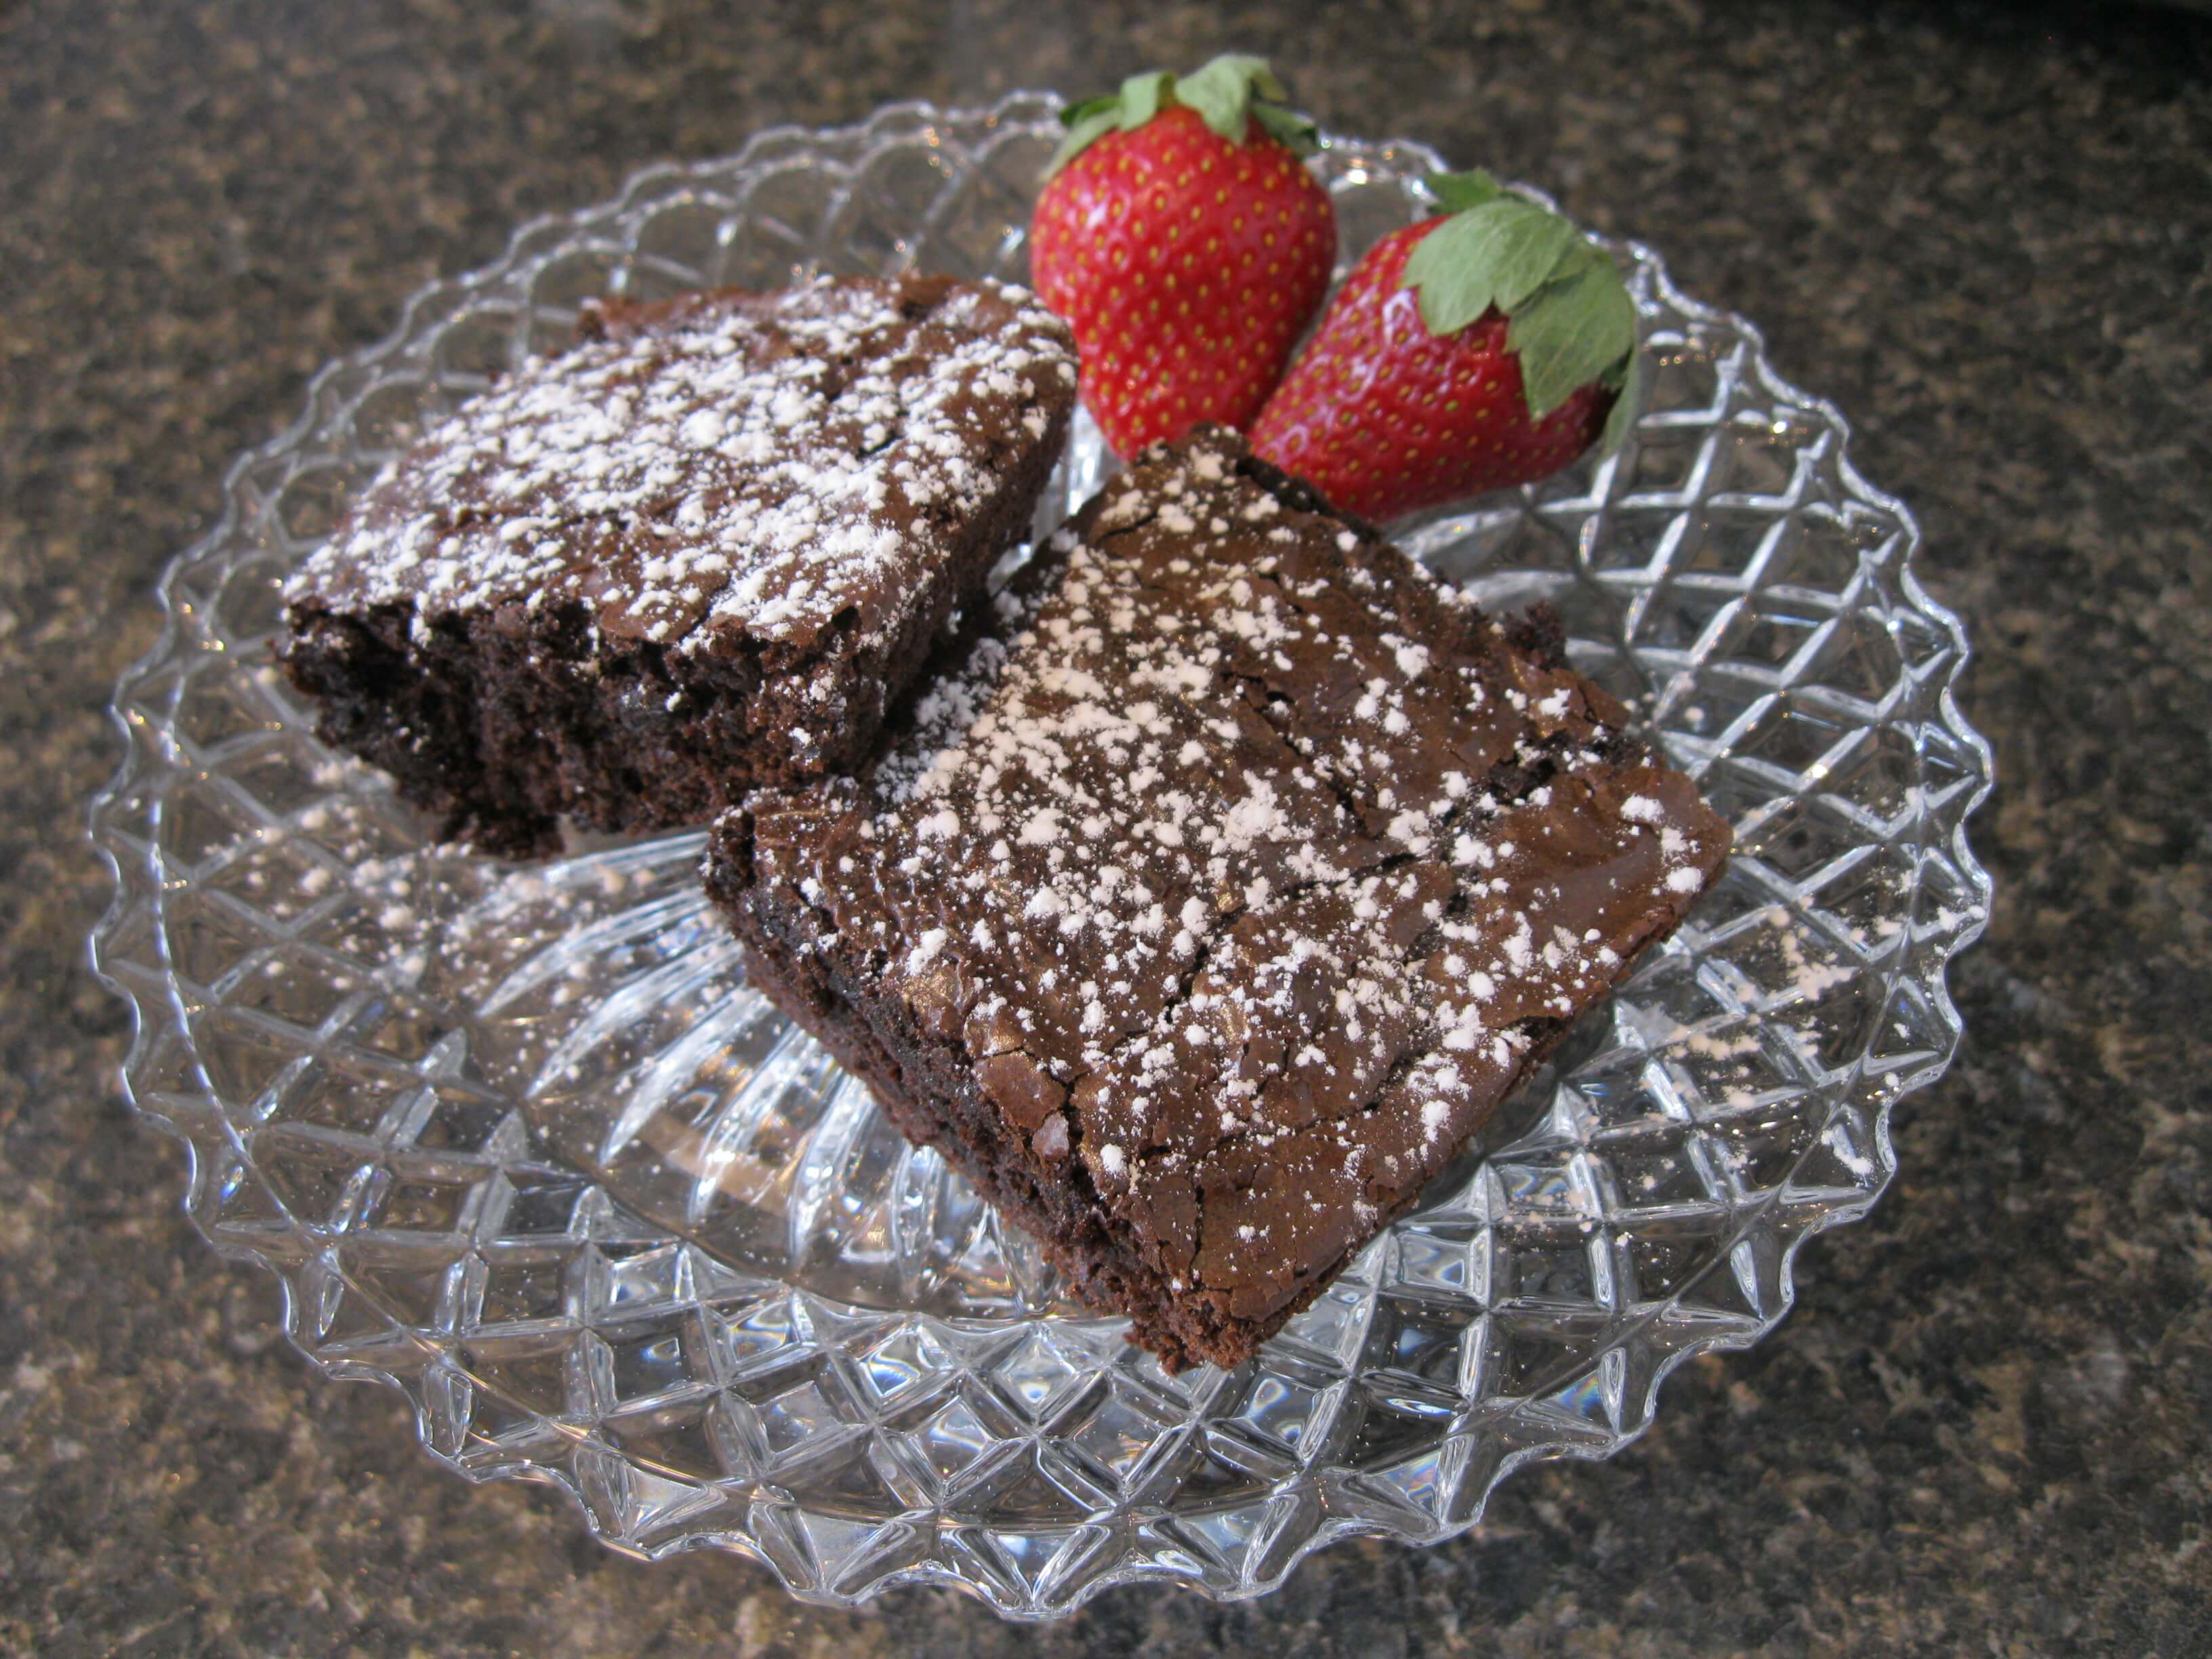 Fresh brownies - There's always a special treat waiting in your room upon arrival at Waypoint House B+B!